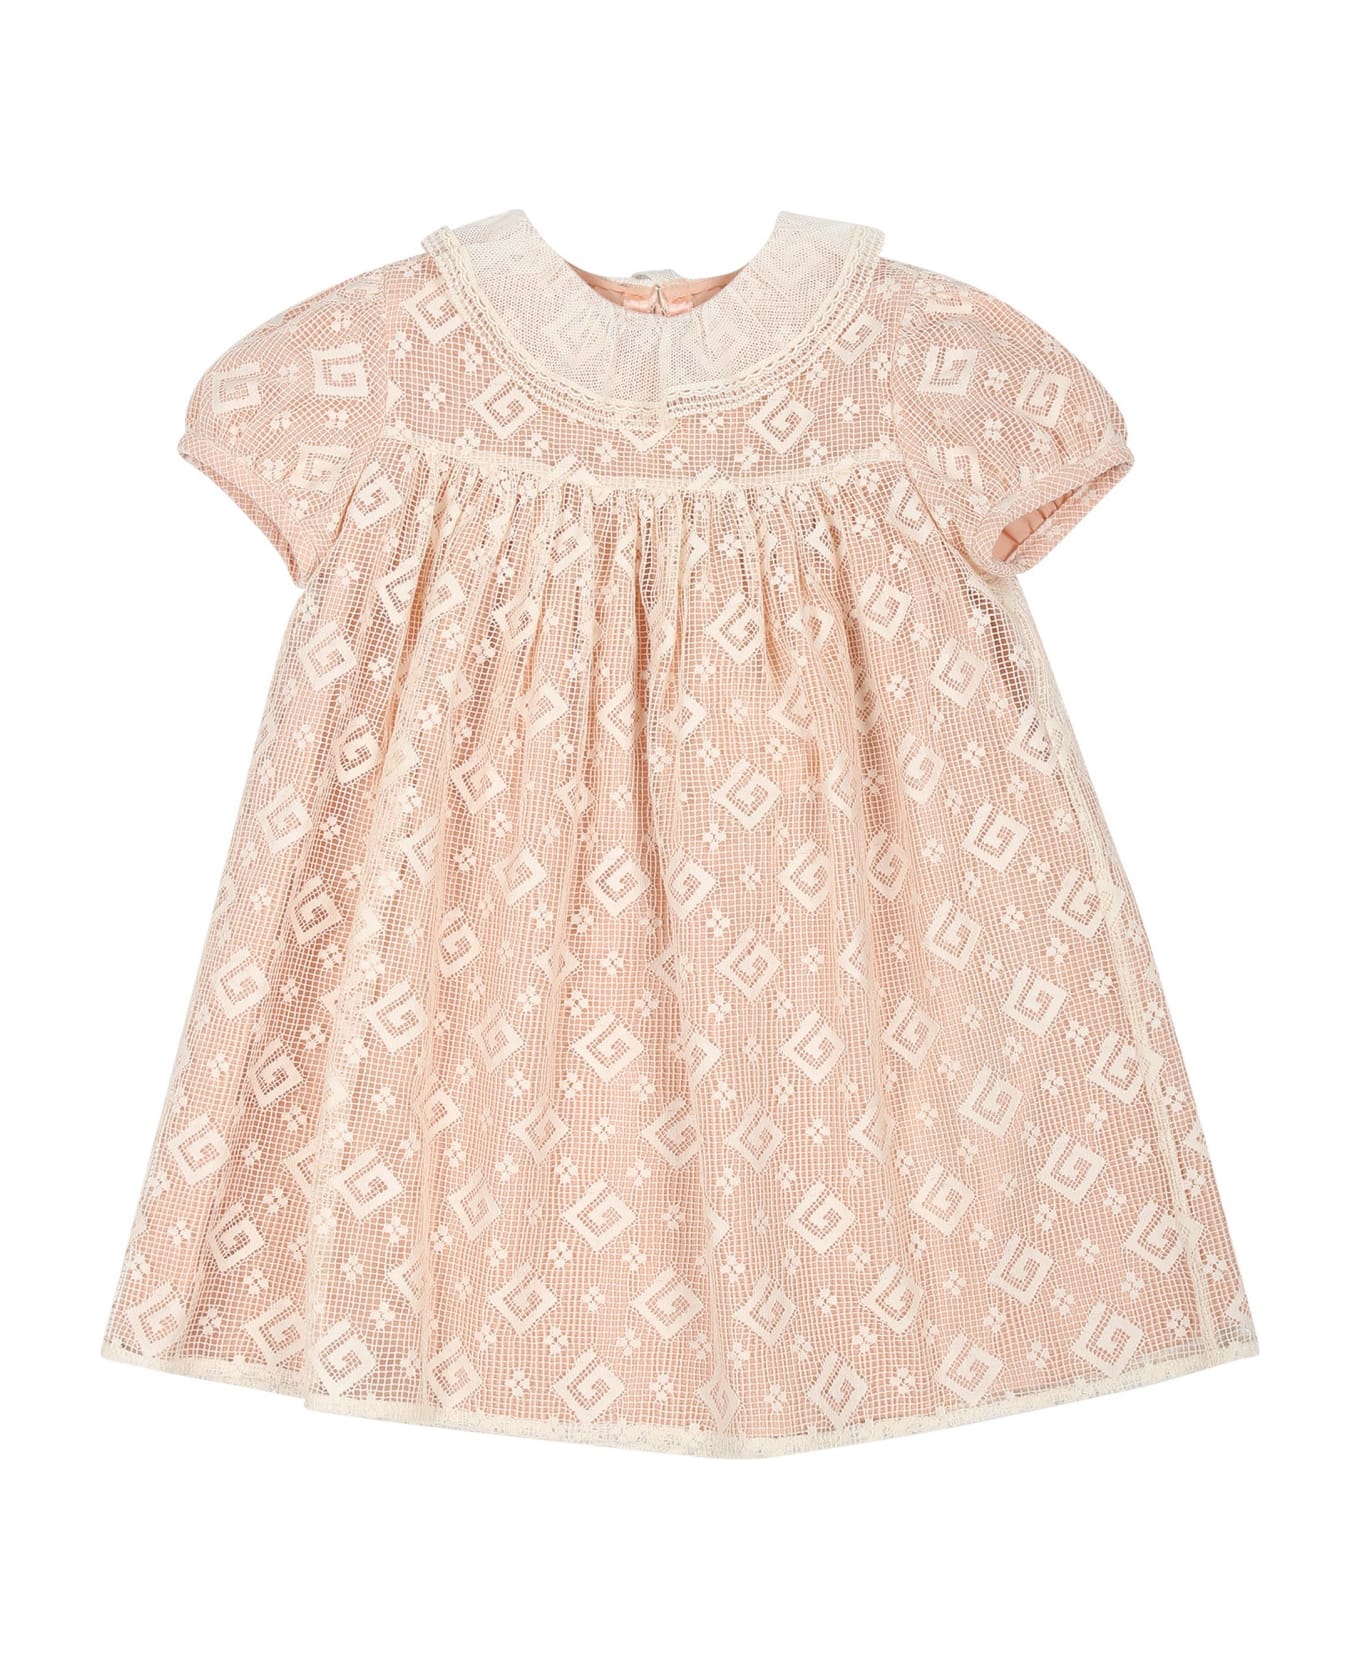 Gucci Pink Dress For Baby Girl With G Quadro Motif - Pink ウェア